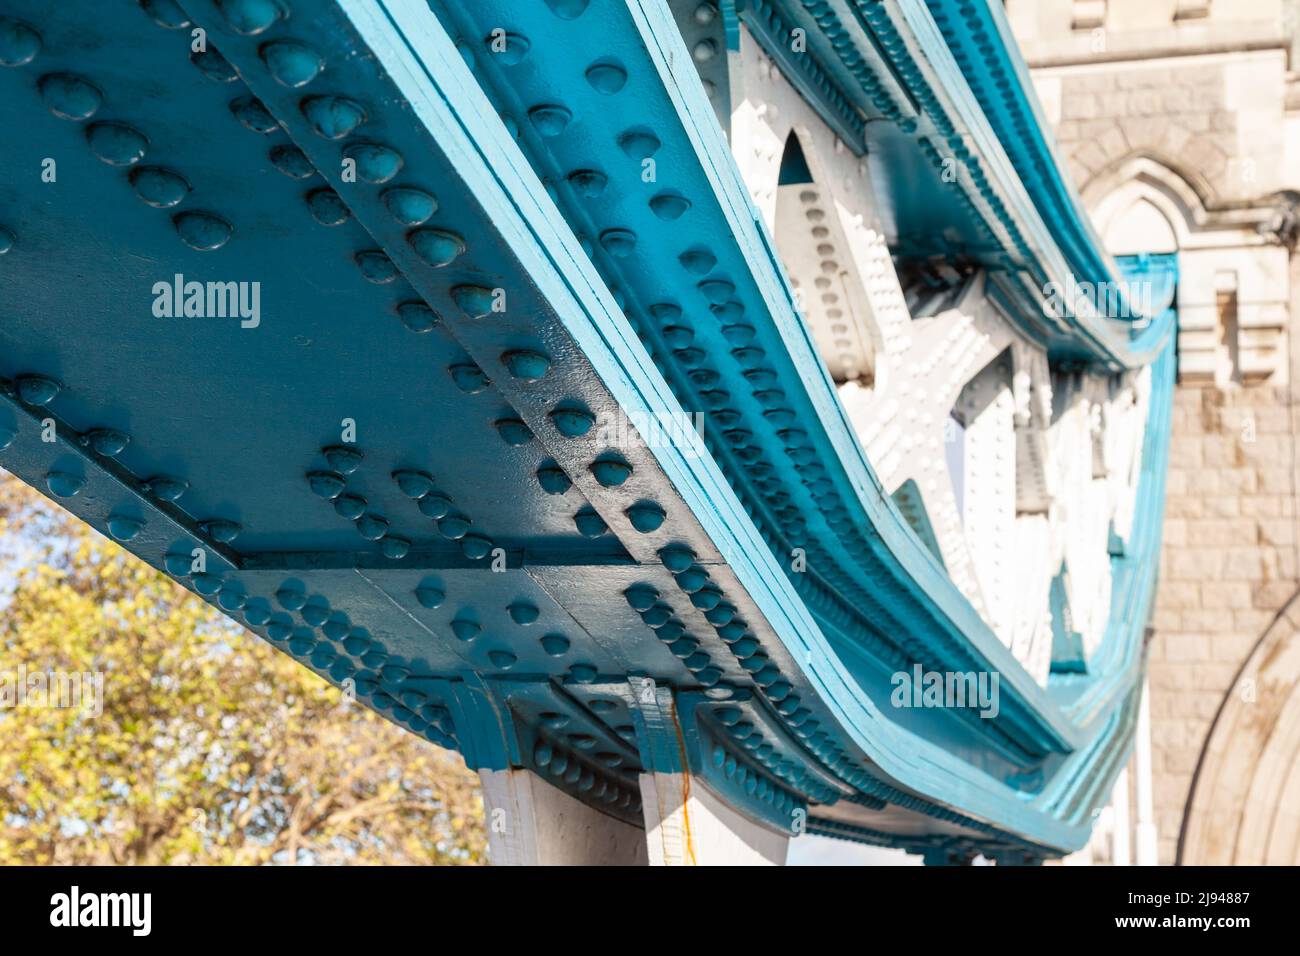 Close-up shot of Tower Bridge detail demonstating metalwork with truss and rivets, London, UK Stock Photo